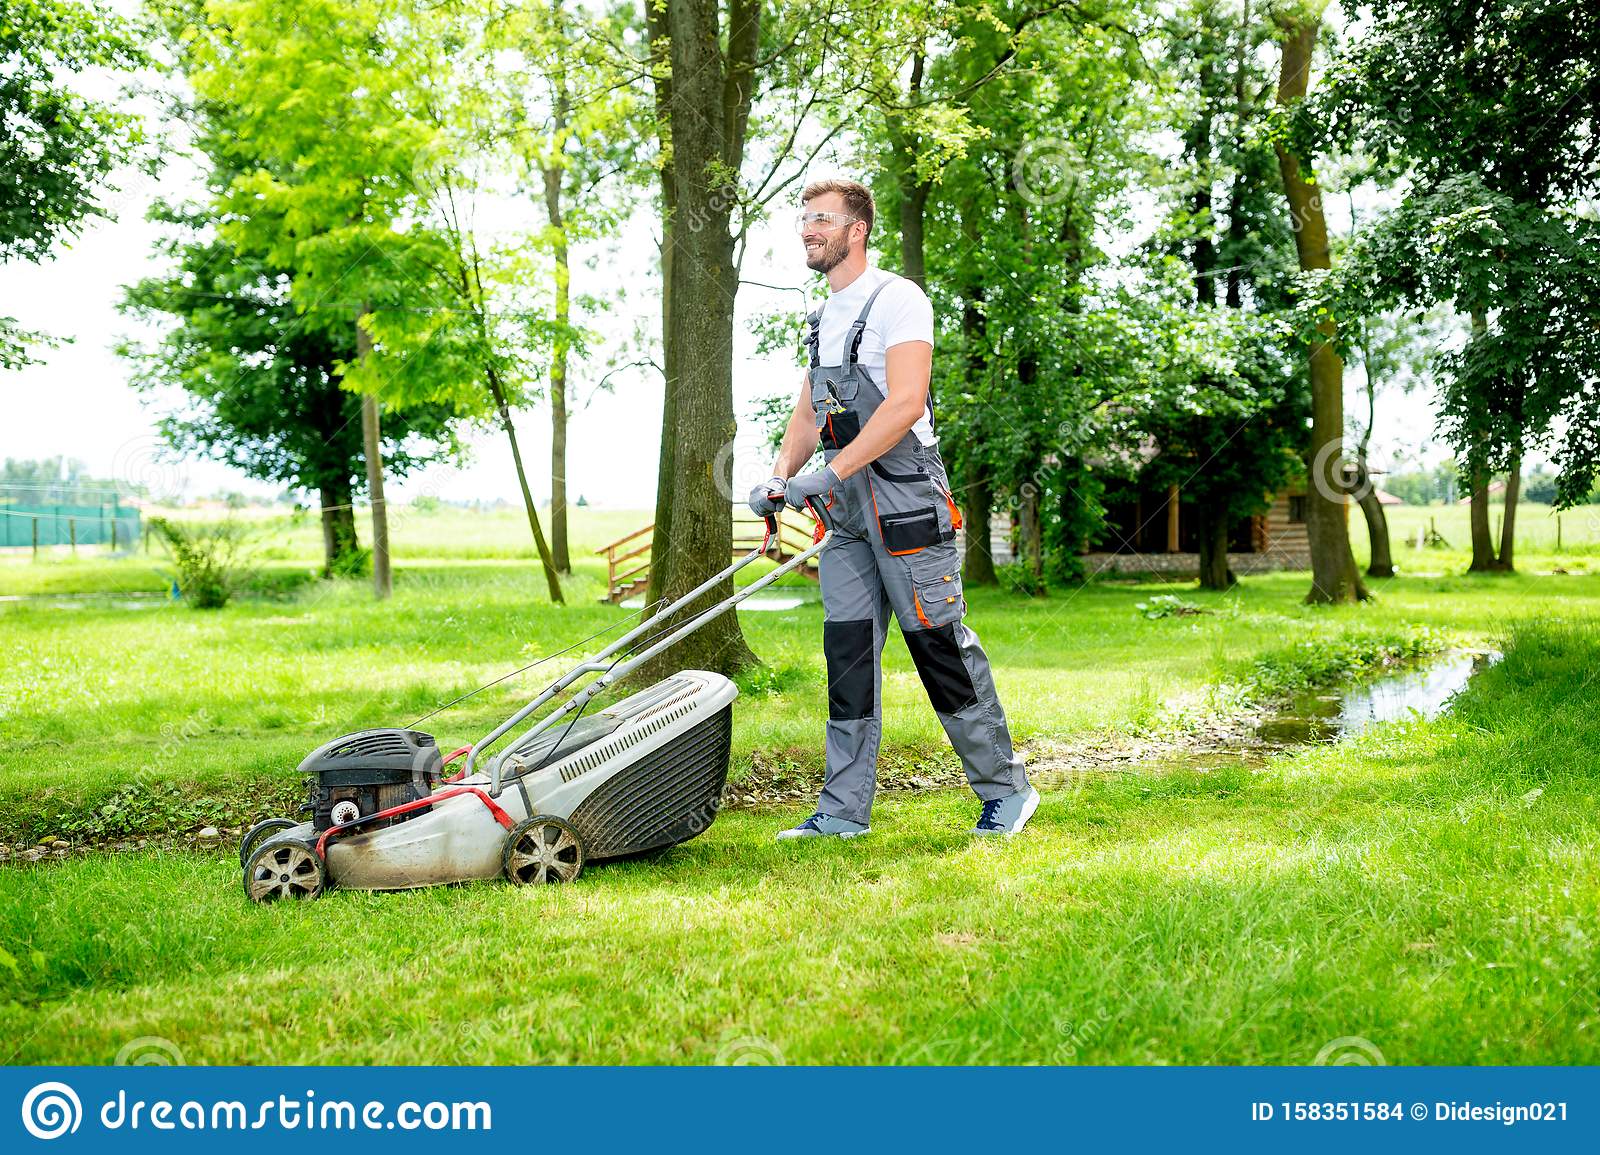 Gardener Equipped With Lawnmower On The Job Stock Photo ...